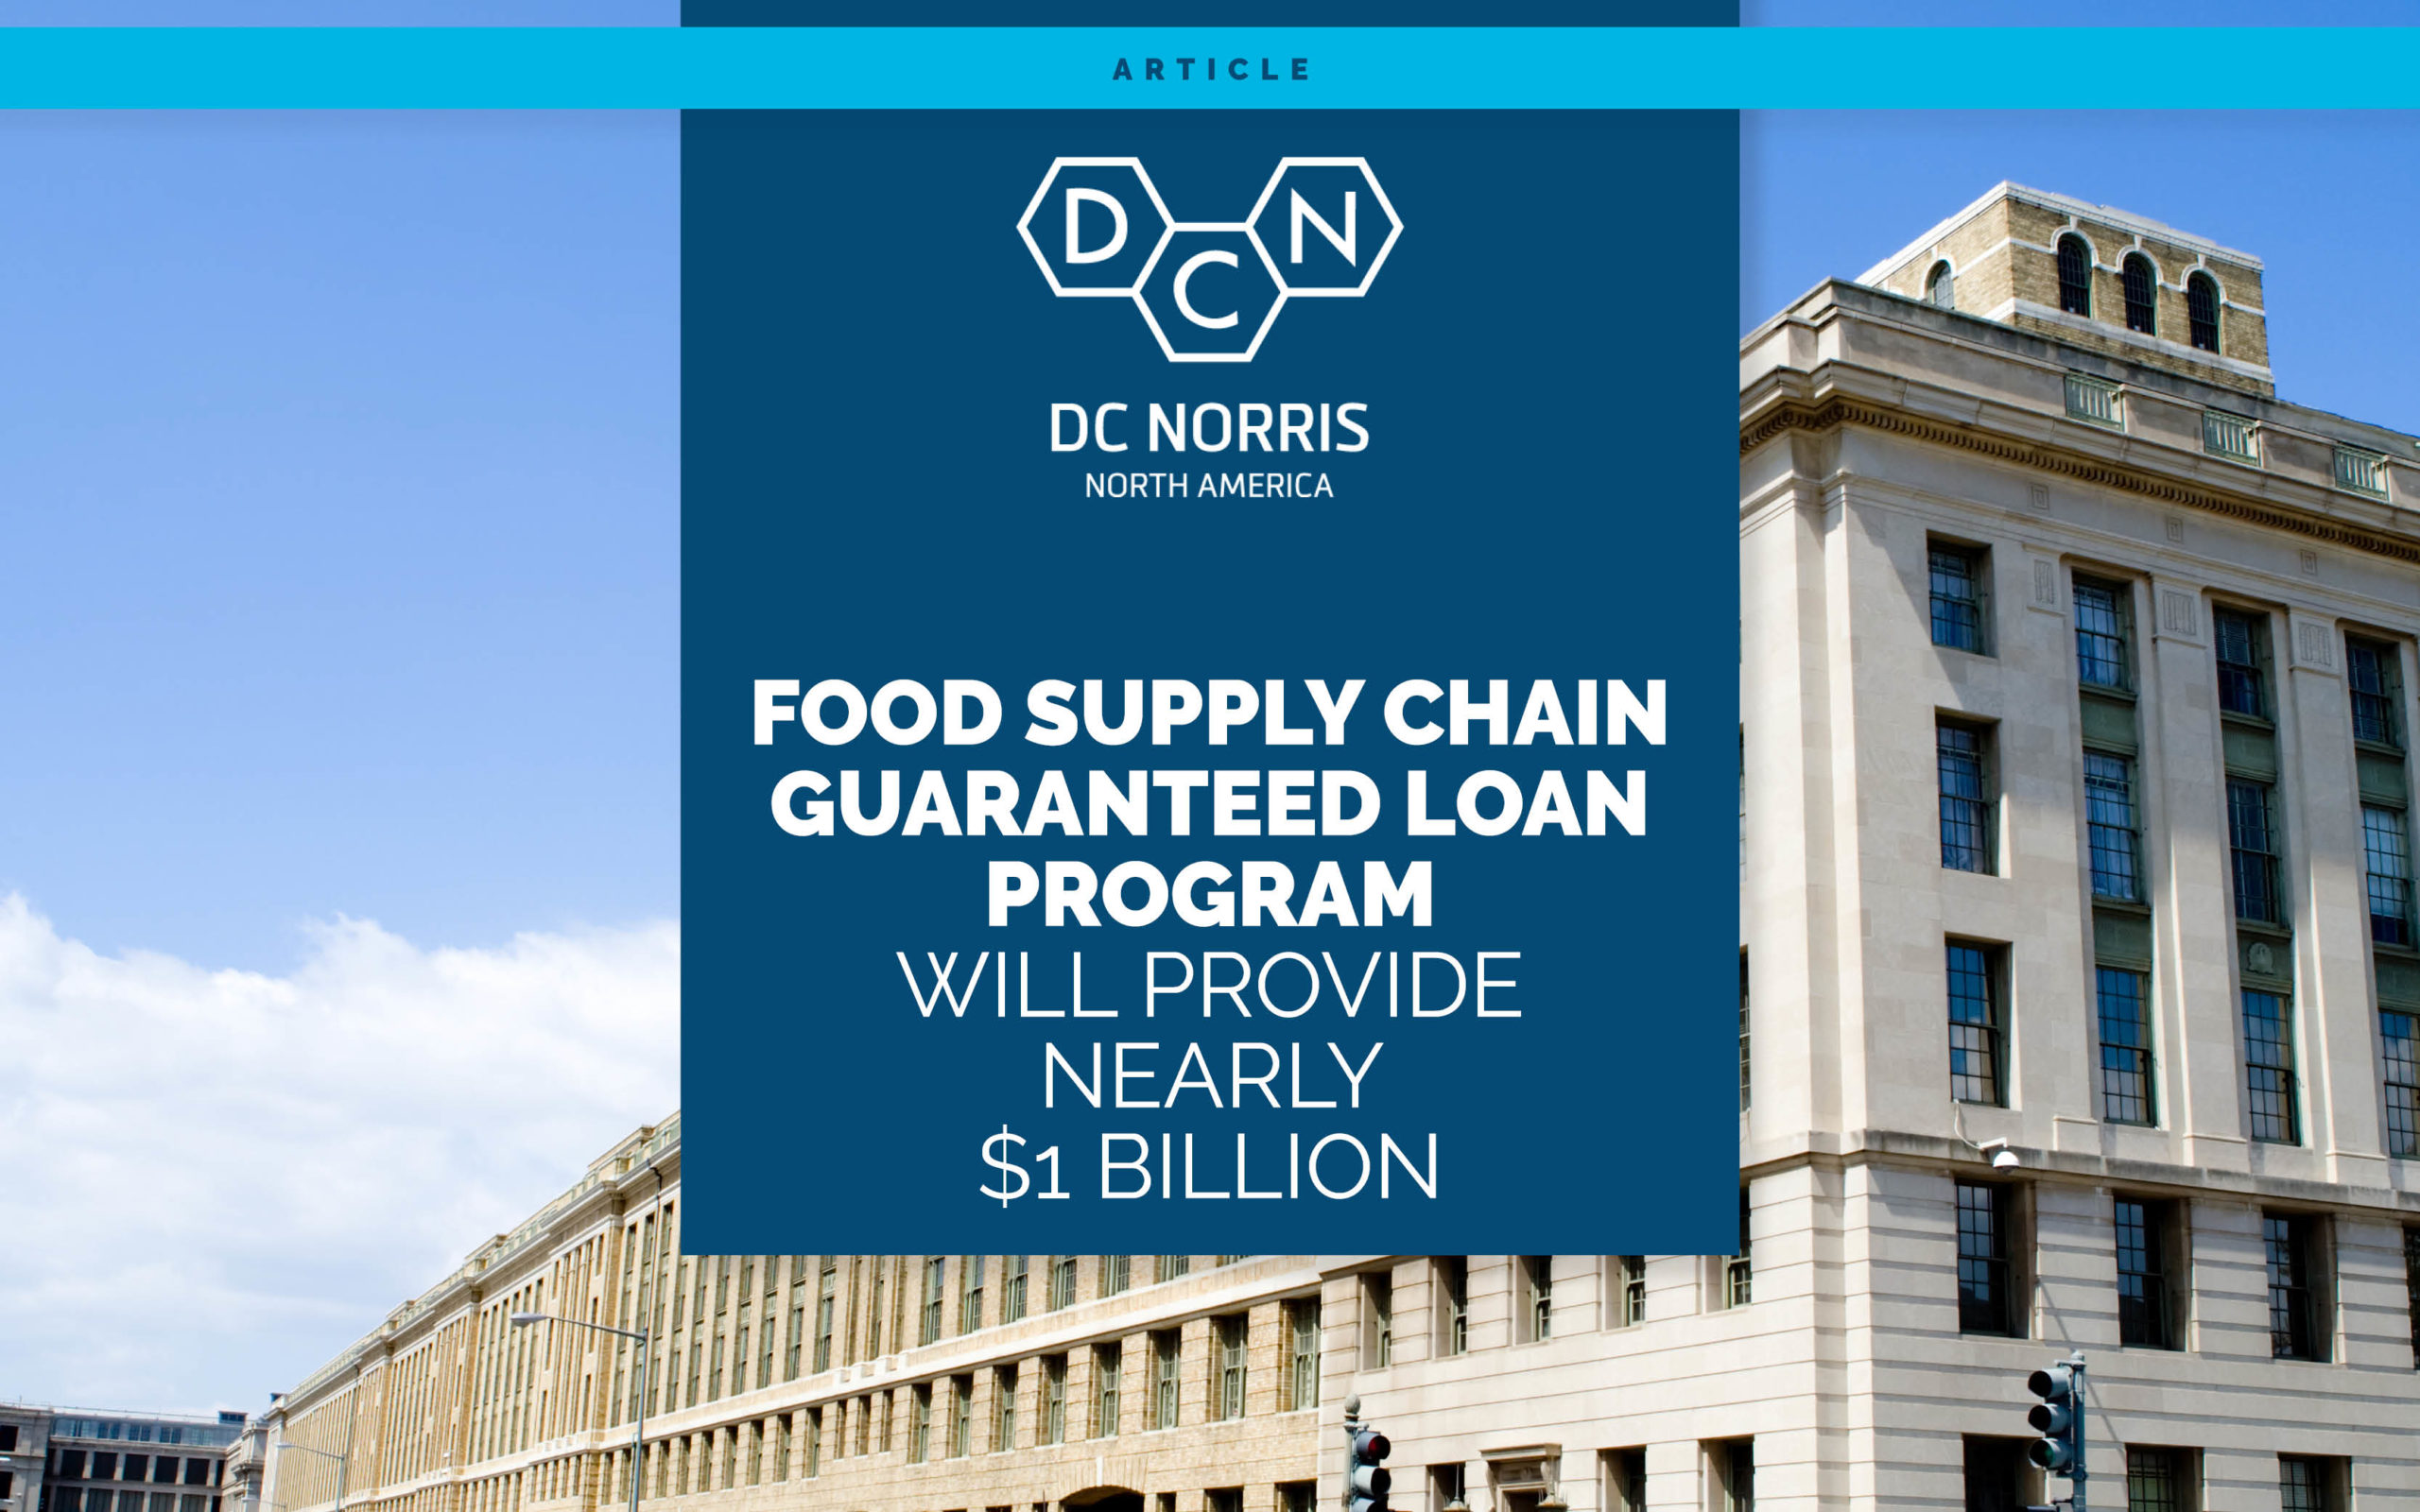 image of the United States Department of Agriculture building in Washington D.C. behind a headline that reads 'Food Supply Chain Guaranteed Loan Program Will Provide Nearly $1 Billion'. Above the headline is the DC Norris North America logo.